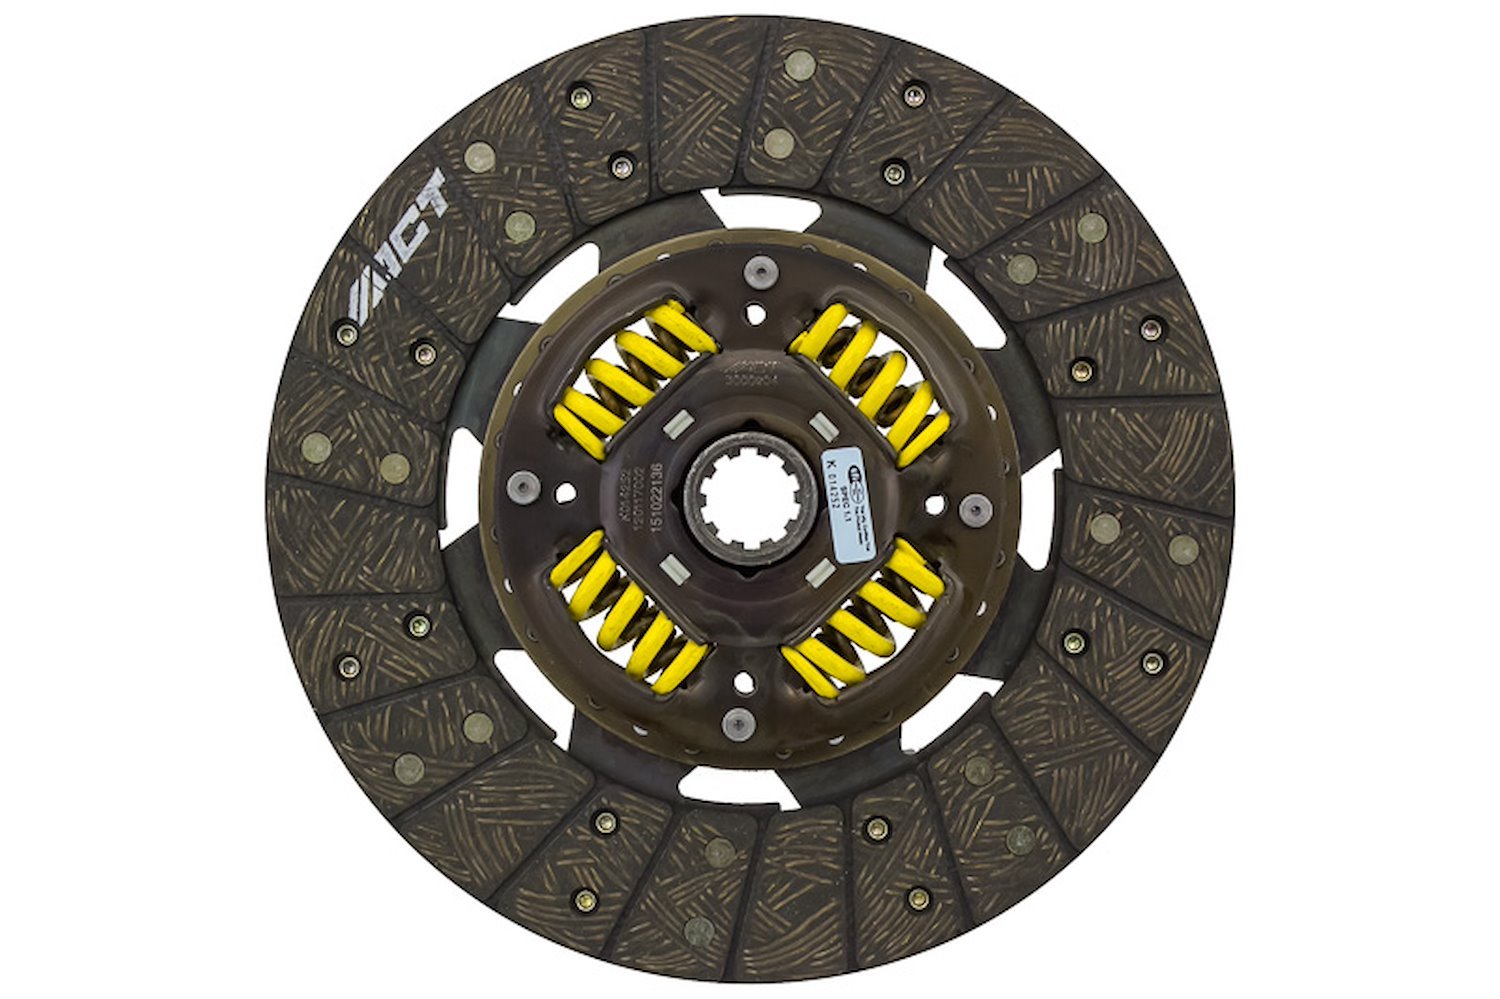 Performance Street Sprung Disc Transmission Clutch Friction Plate Fits Select GM